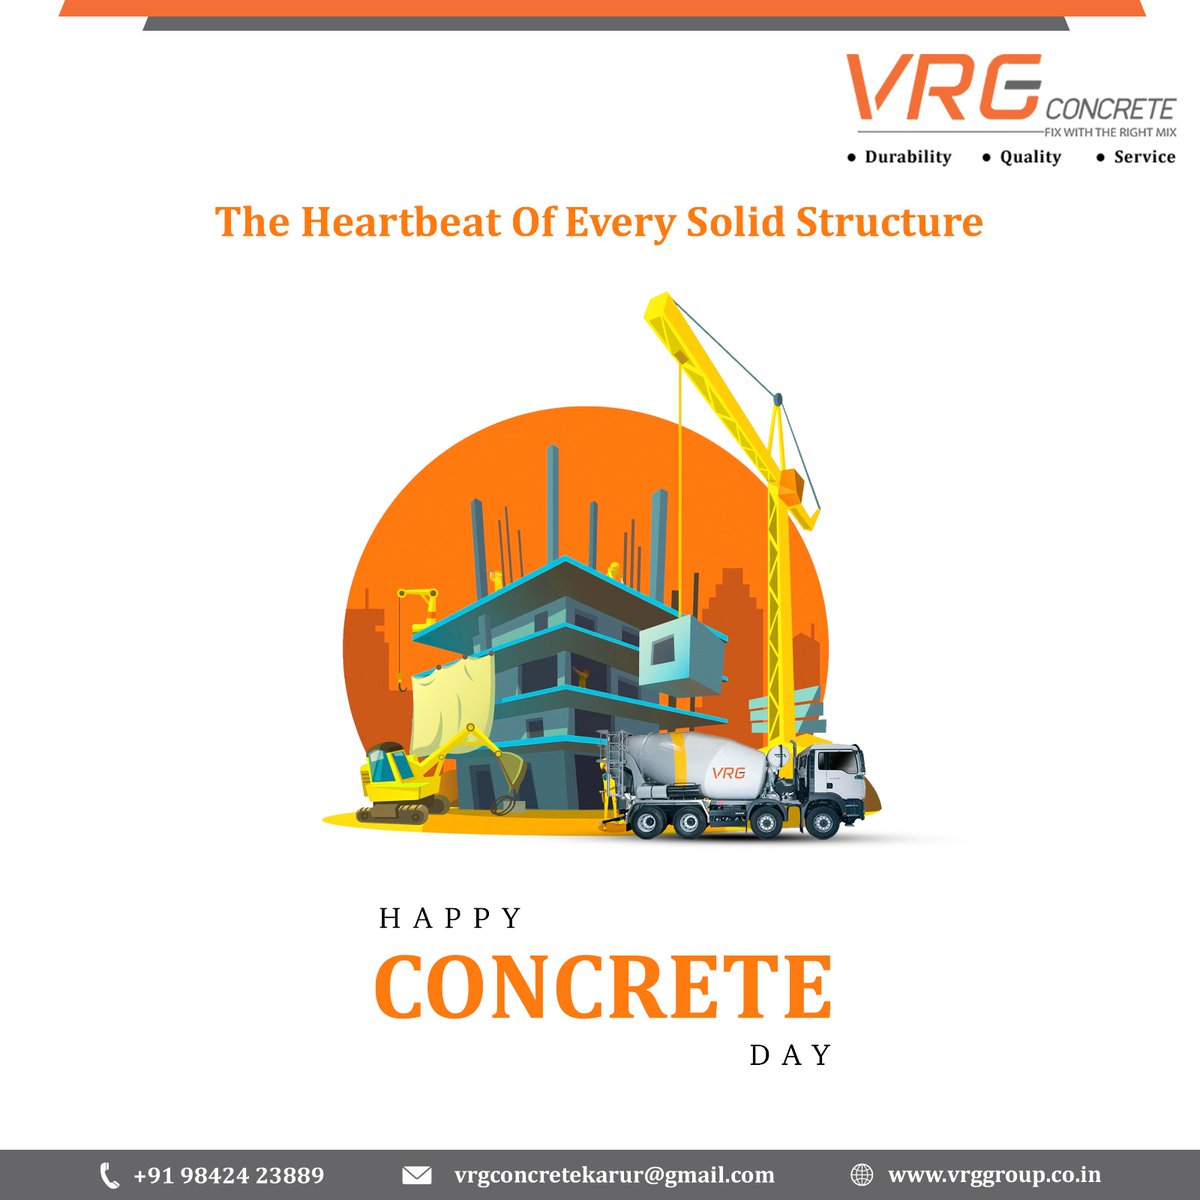 Wishing everyone a Happy Concrete Day from the VRG.

Contact us @+91 98424 23889

SERVICE AREAS:
--Karur
--Dharapuram
--Namakkal
--Erode
#vrgconcrete #vrggroup #vrgconcretemix #concretemix #concreteday #BuildingOurWorld #StrengthAndVersatility #concretedesign #readymadeconcrete